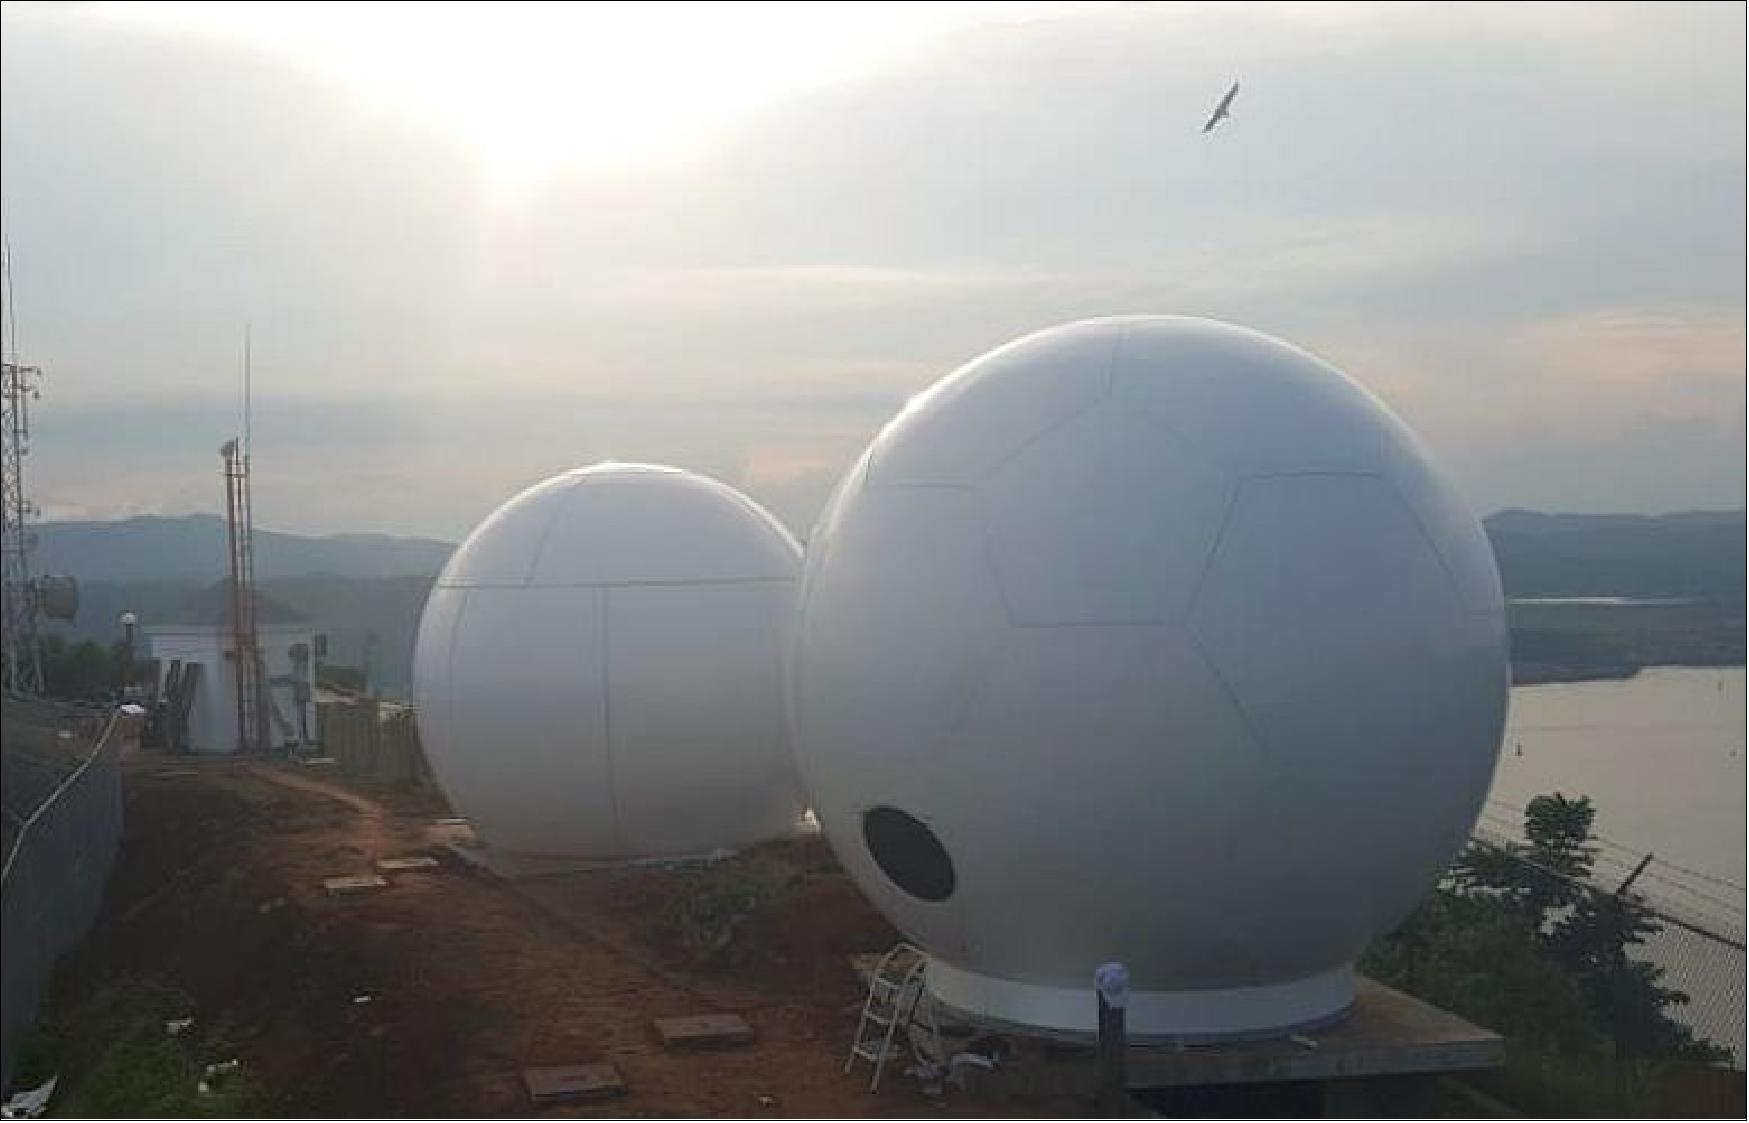 Figure 10: Panama Earth station used for EV-9 operations (image credit: exactEarth)